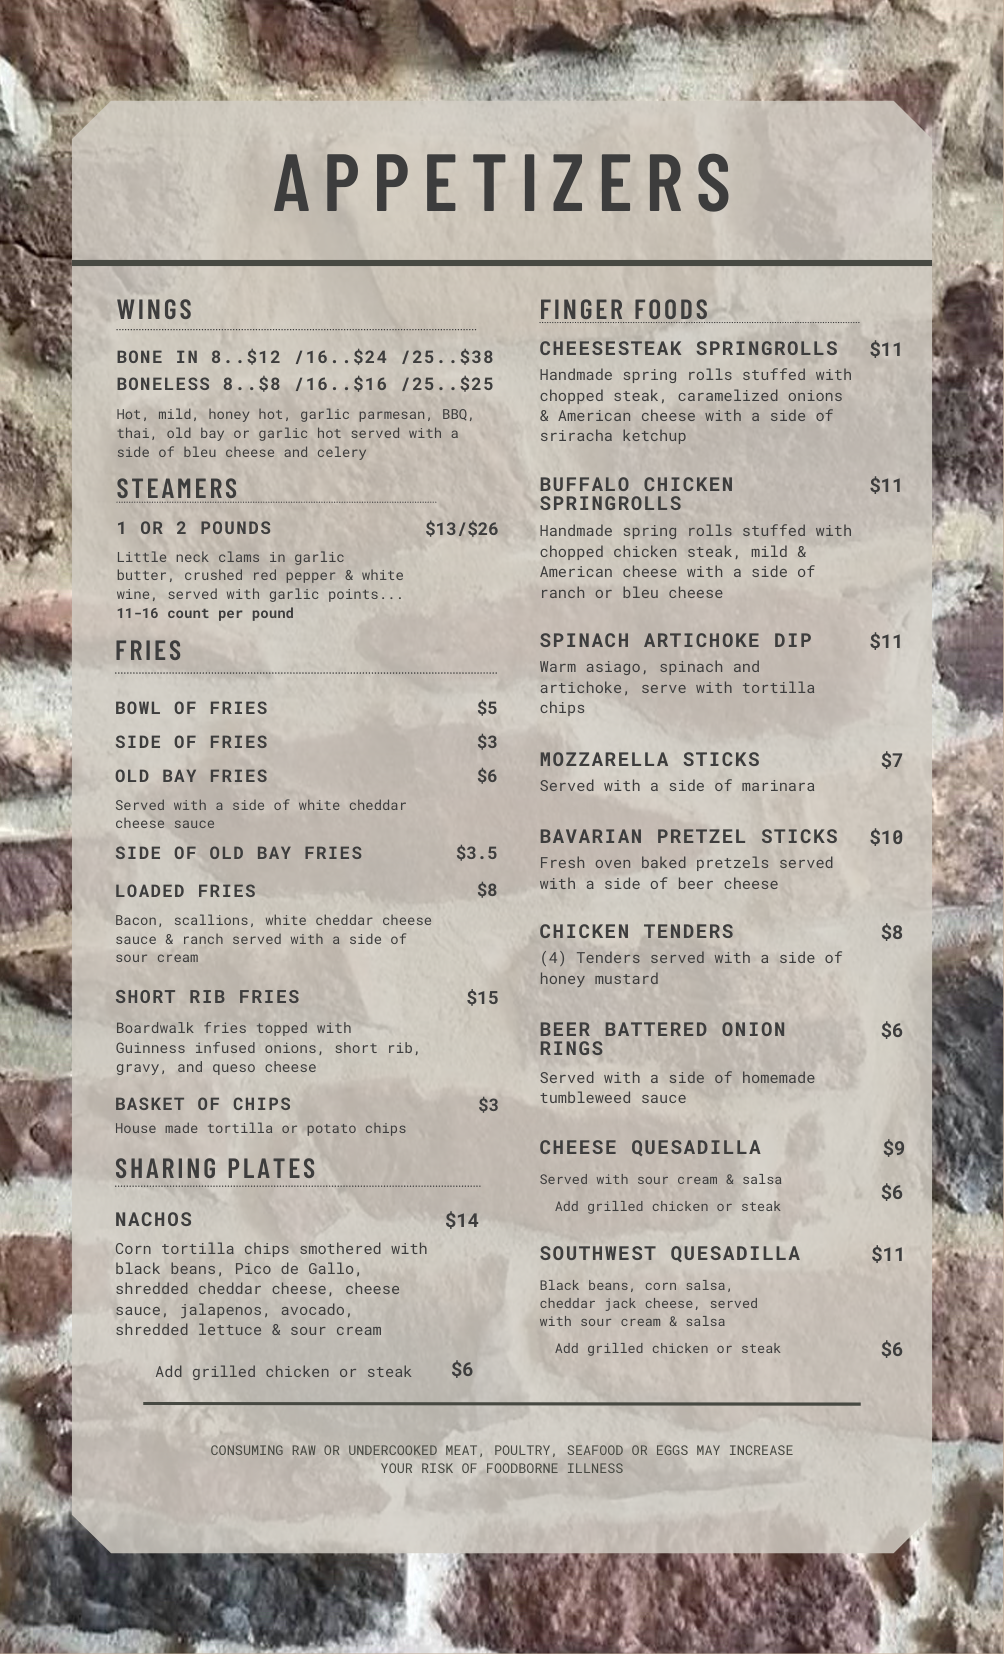 A close-up of a weathered restaurant menu on a brick wall featuring a selection of appetizers including wings, fries, and nachos.